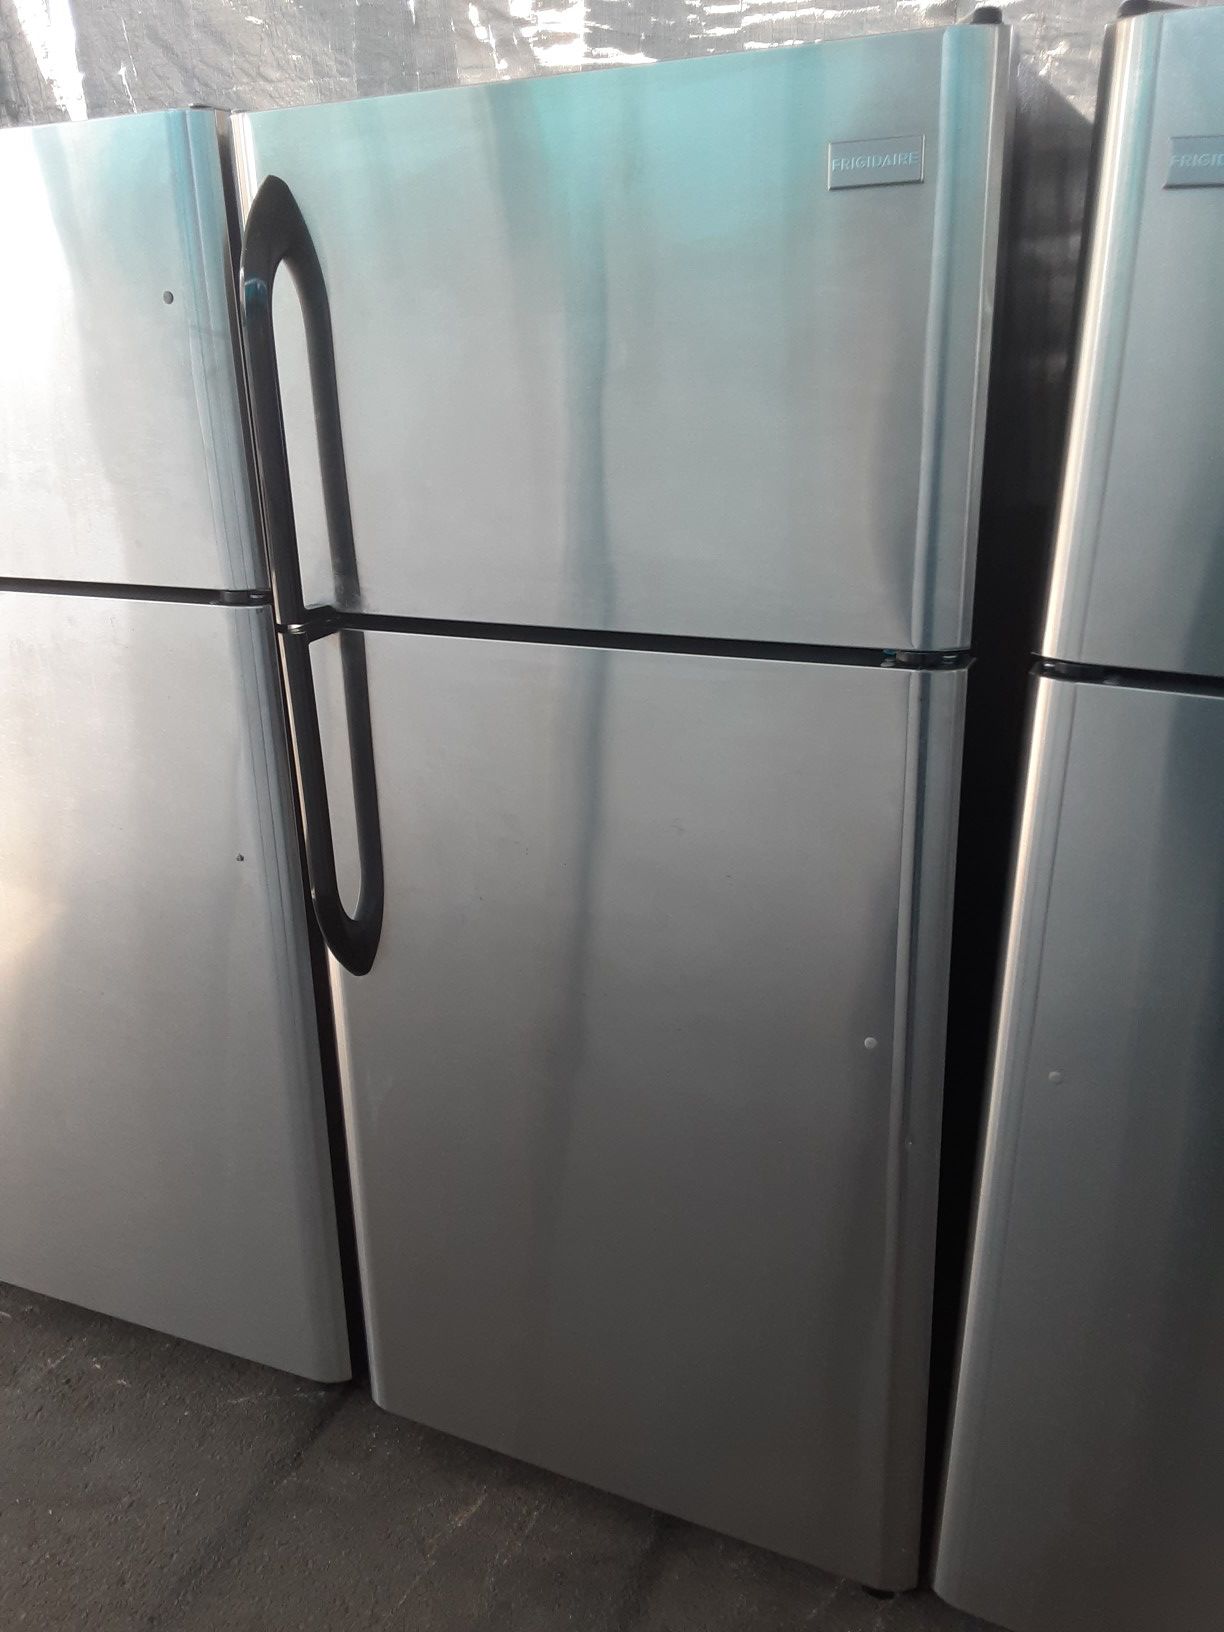 $350 Frigidaire stainless 18 cubic fridge includes delivery in the San Fernando Valley a warranty and installation